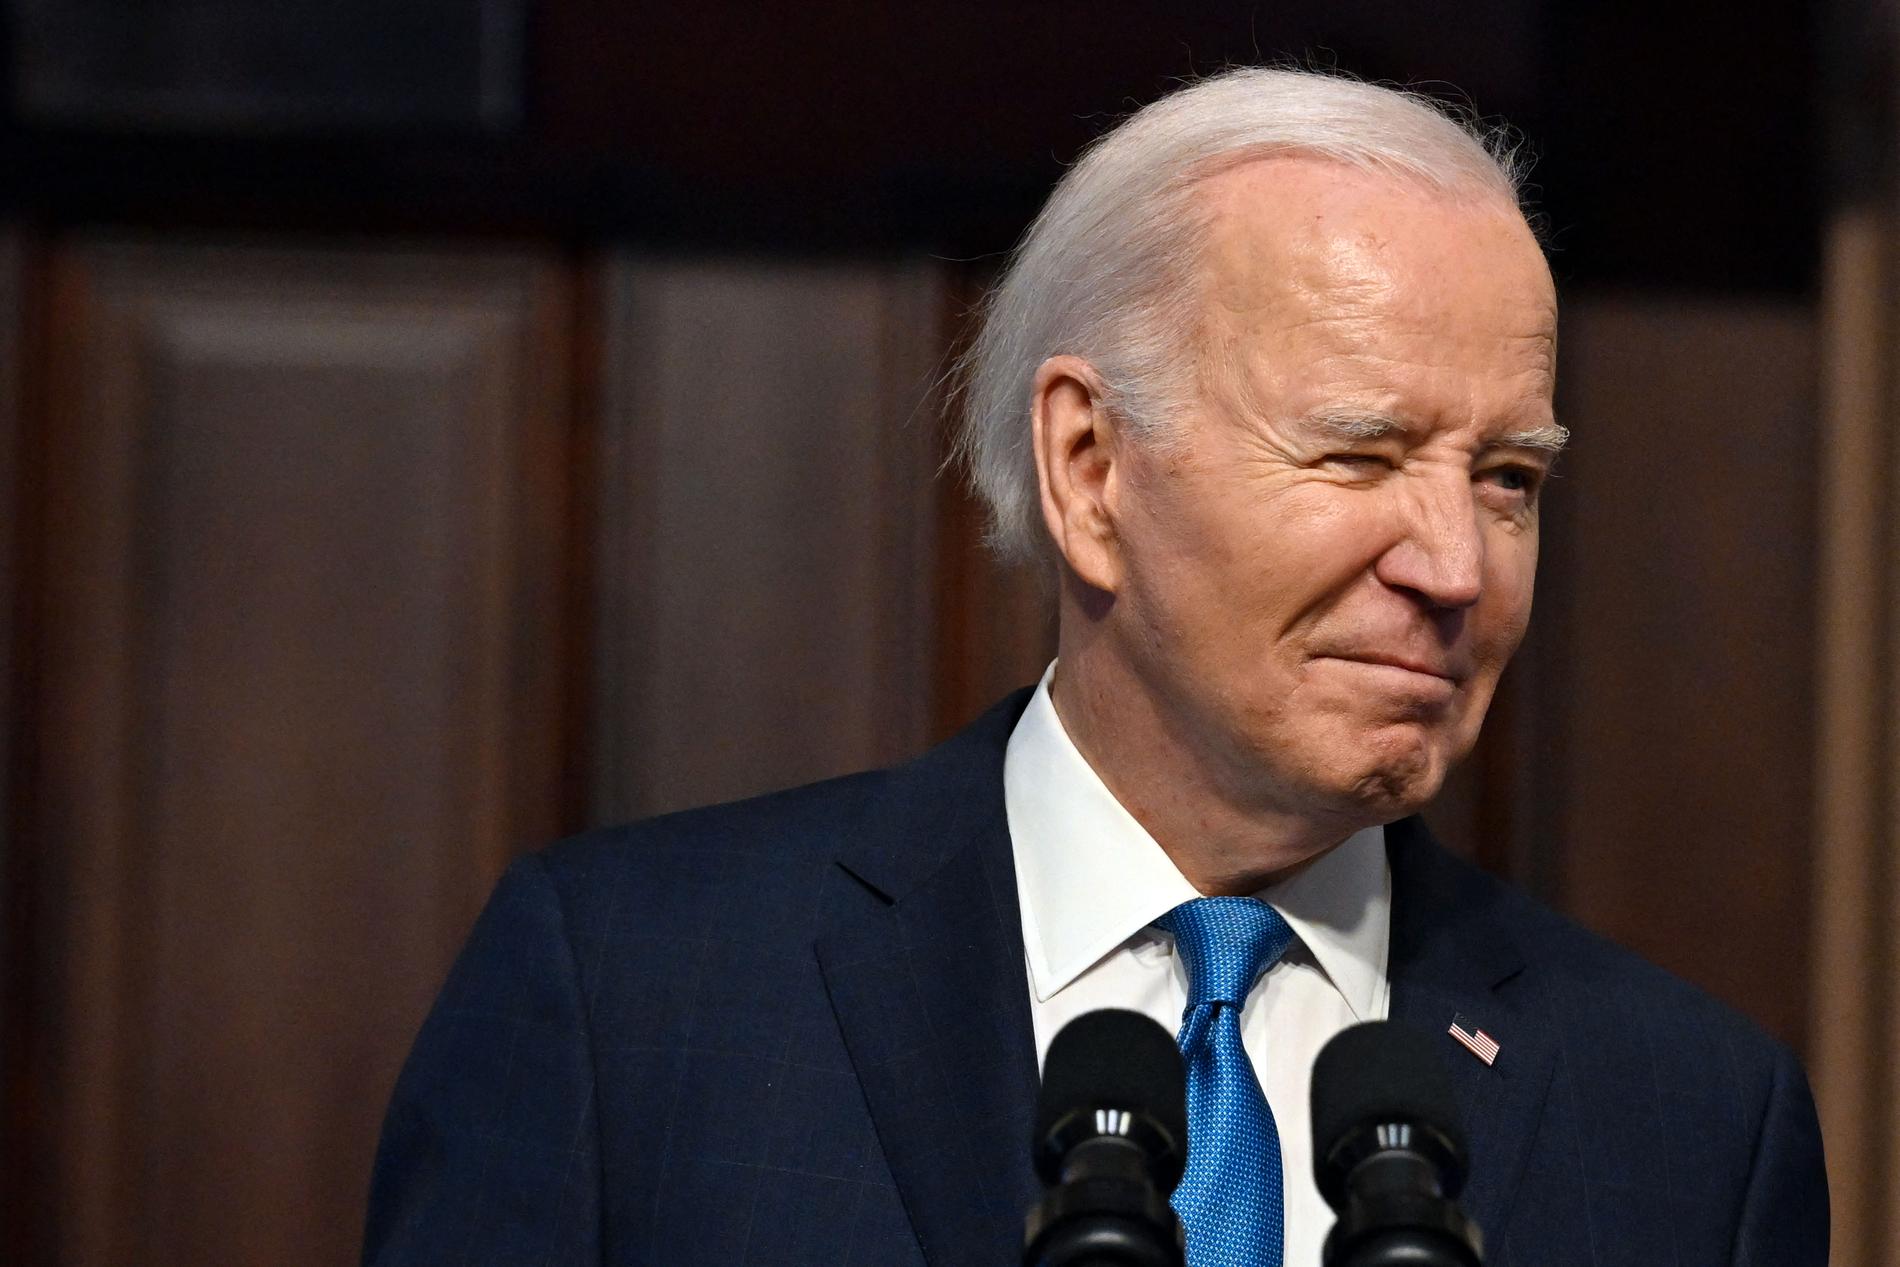 OLDEST PRESIDENT: Many voters say they think Joe Biden is too old to be president.  And fewer say the same about Donald Trump, who is four years his junior.